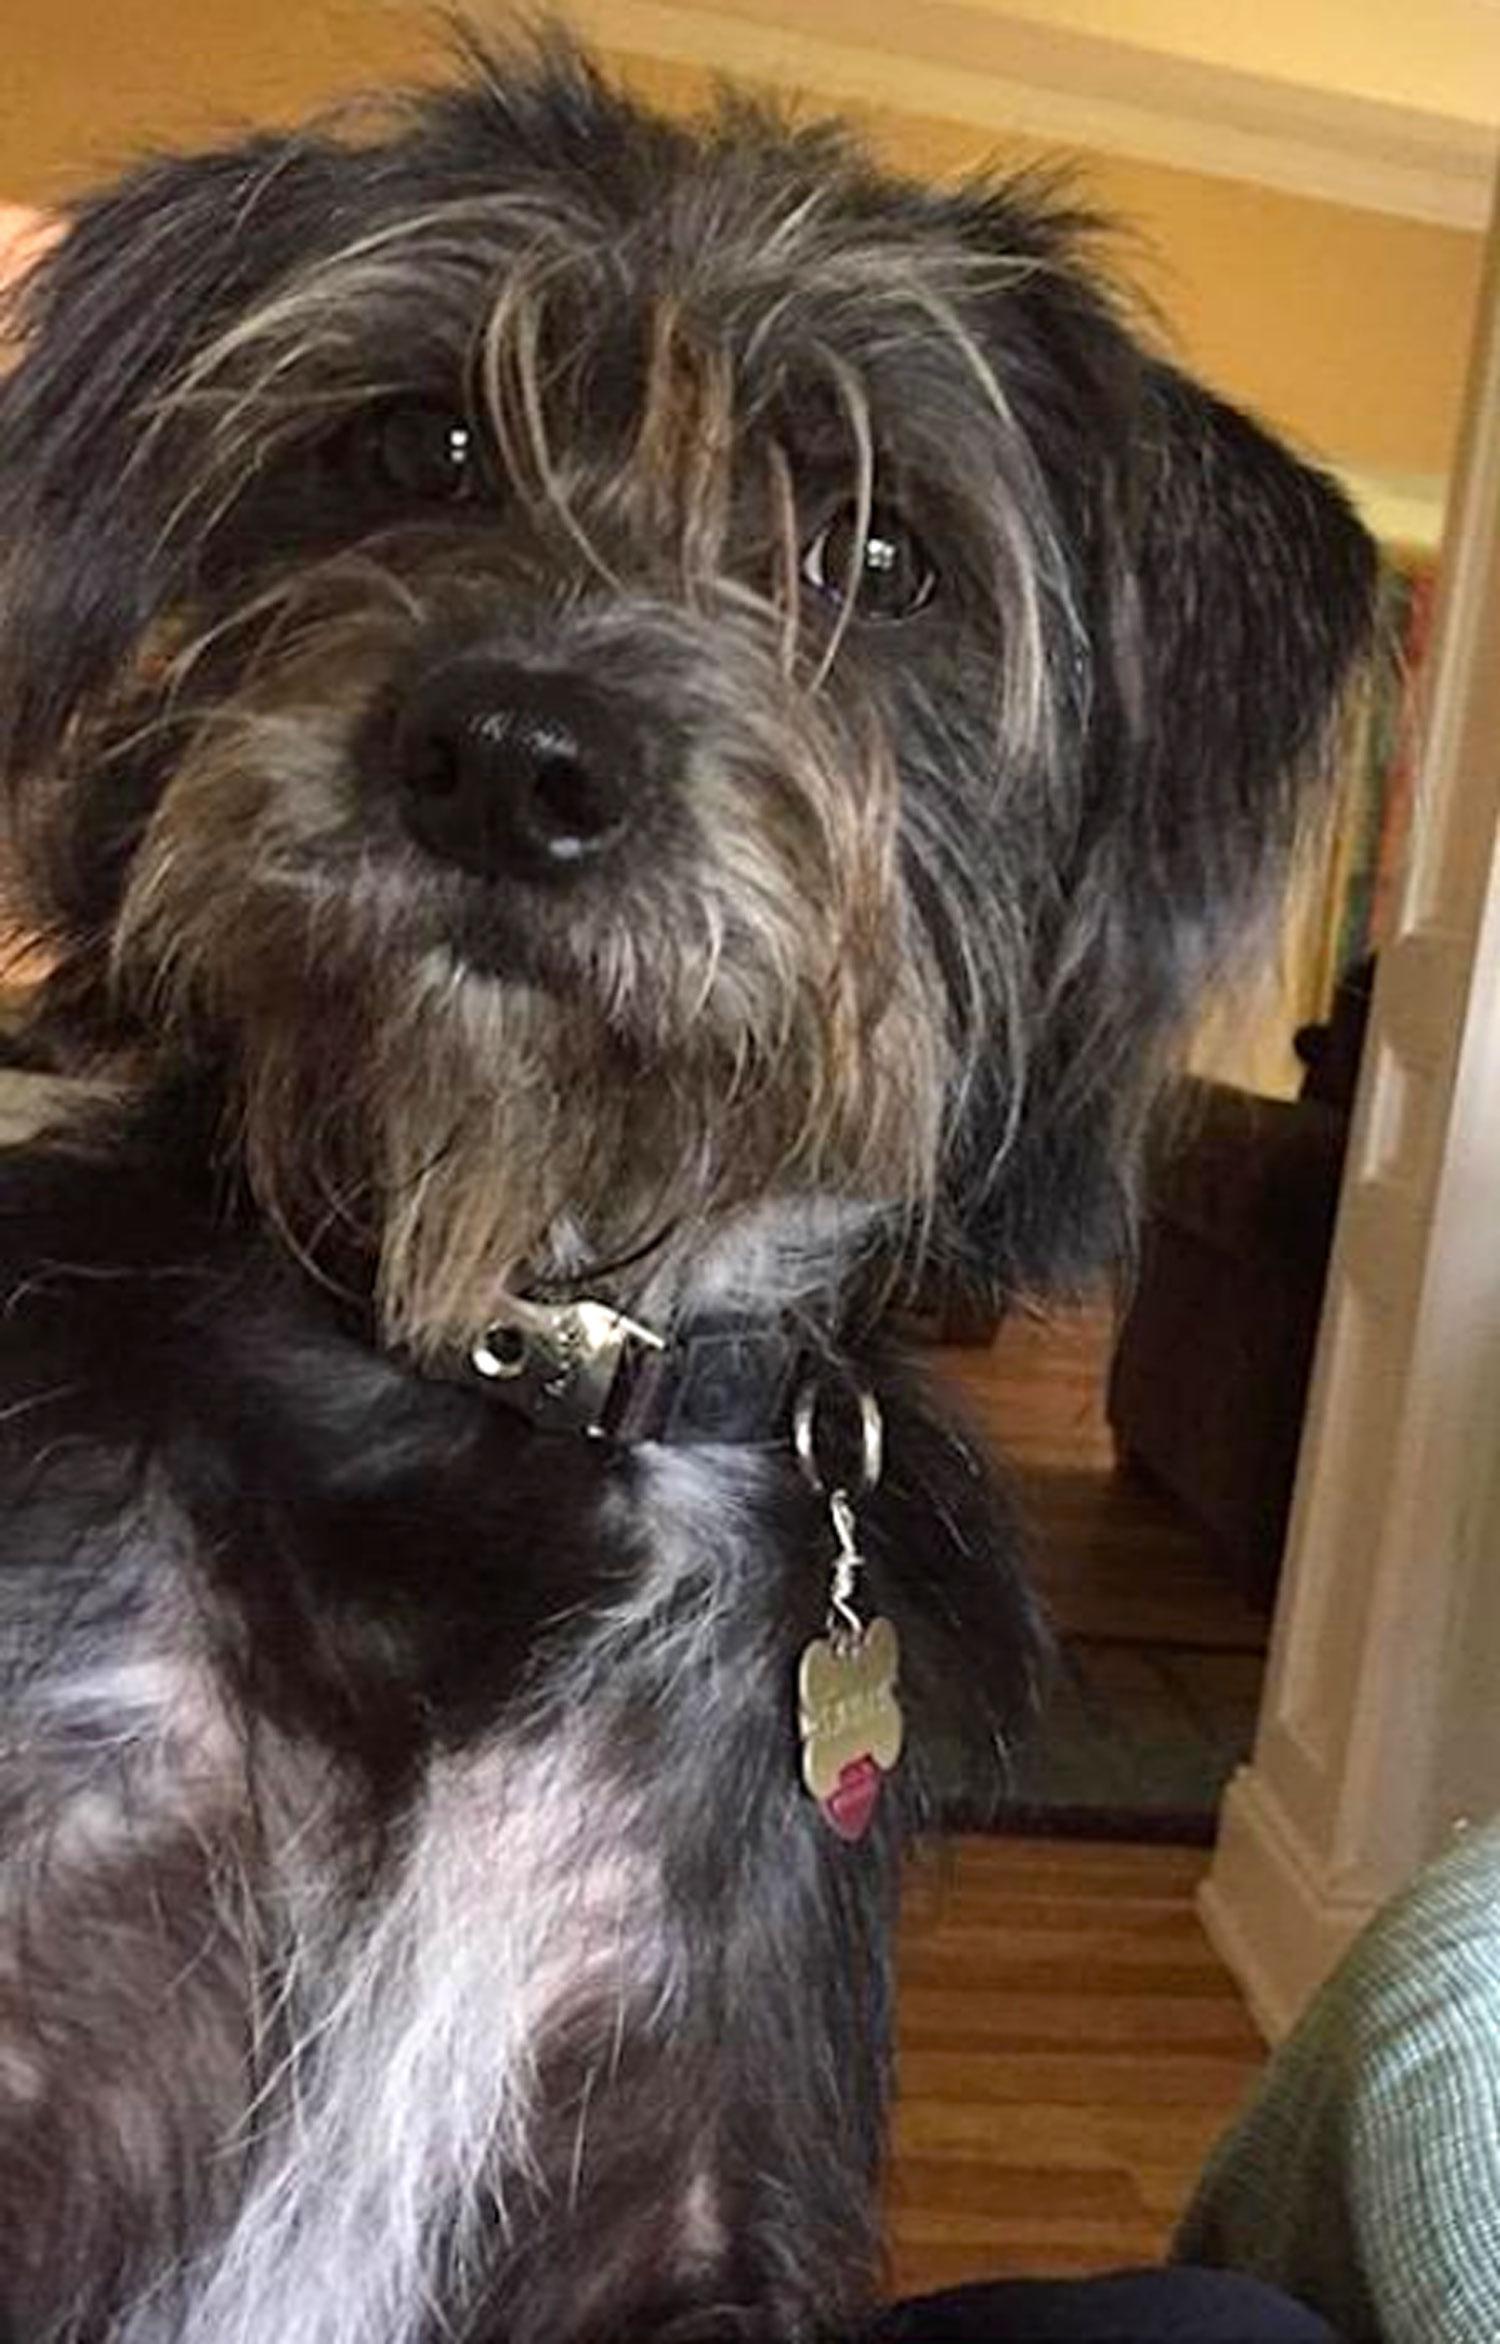 Dear Readers, this is Sadie, a 6-year-old terrier mix, who was adopted from Animal Defense League. She is sweet, friendly, loves any moving thing, even her cat siblings. — Nancy Pawlas